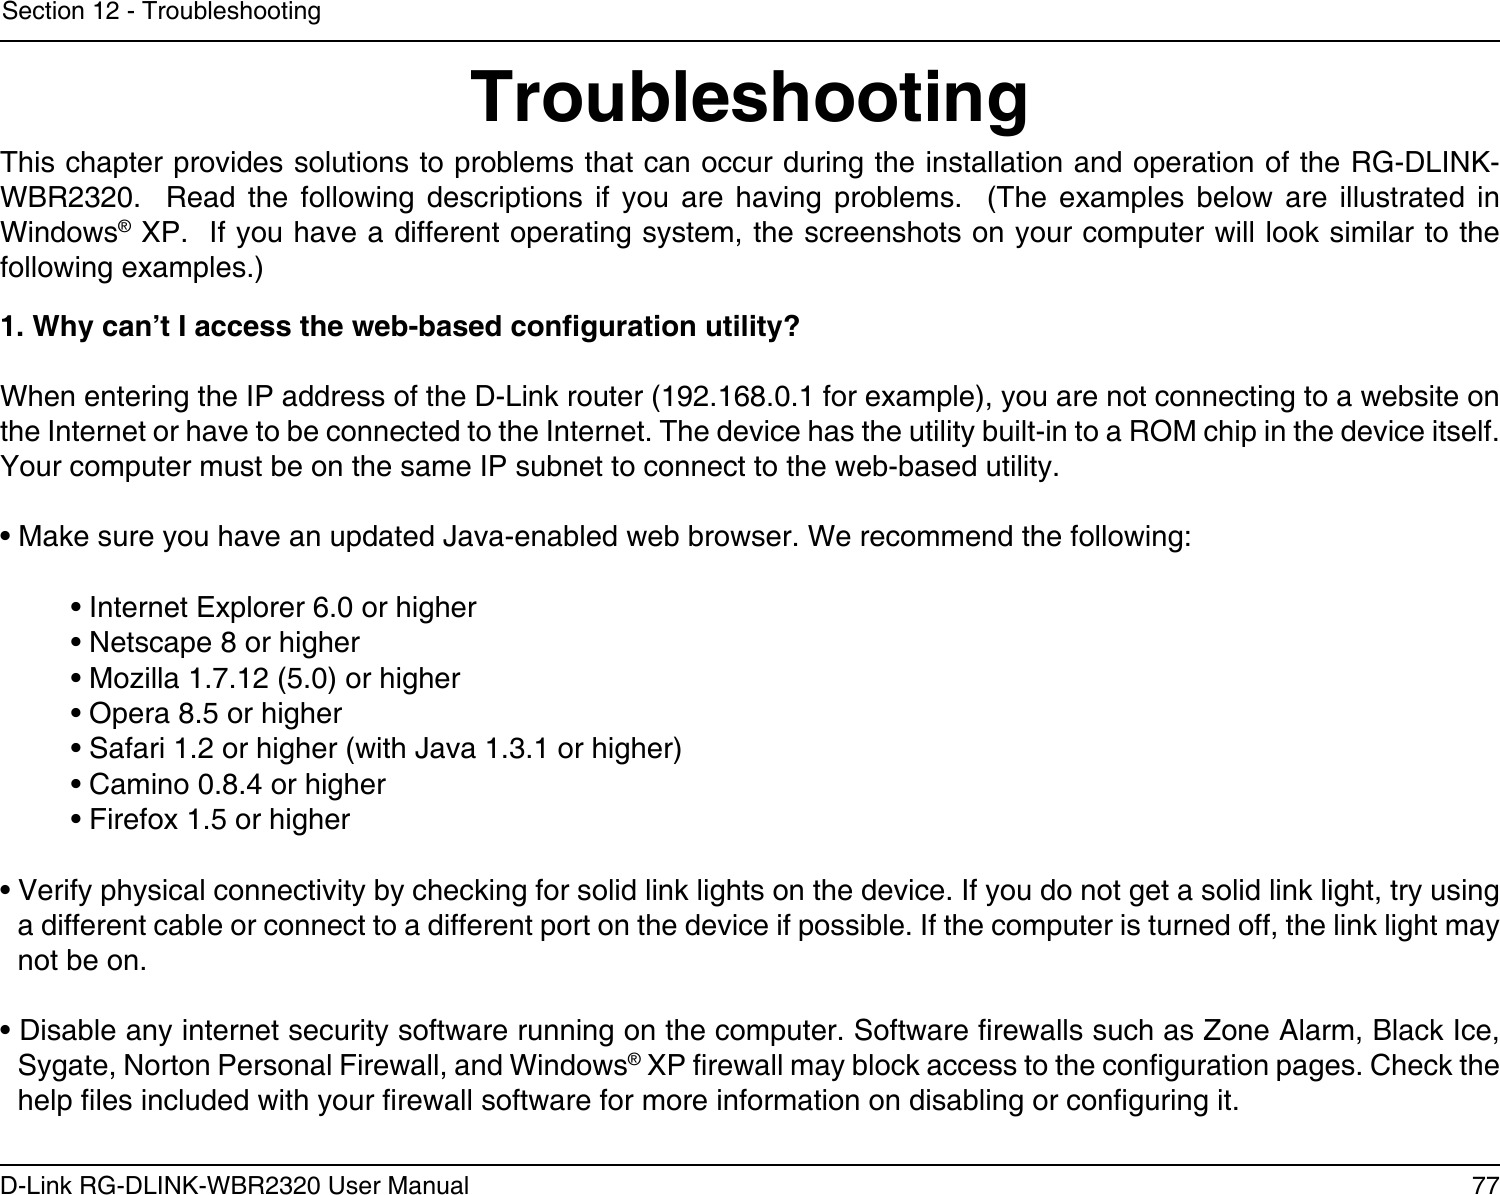 77D-Link RG-DLINK-WBR2320 User ManualSection 12 - TroubleshootingTroubleshootingThis chapter provides solutions to problems that can occur during the installation and operation of the RG-DLINK-WBR2320.    Read  the  following  descriptions  if  you  are  having  problems.    (The  examples  below  are  illustrated  in Windows® XP.  If you have a different operating system, the screenshots on your computer will look similar to the following examples.)1. Why can’t I access the web-based conguration utility?When entering the IP address of the D-Link router (192.168.0.1 for example), you are not connecting to a website on the Internet or have to be connected to the Internet. The device has the utility built-in to a ROM chip in the device itself. Your computer must be on the same IP subnet to connect to the web-based utility. • Make sure you have an updated Java-enabled web browser. We recommend the following: • Internet Explorer 6.0 or higher • Netscape 8 or higher • Mozilla 1.7.12 (5.0) or higher • Opera 8.5 or higher • Safari 1.2 or higher (with Java 1.3.1 or higher) • Camino 0.8.4 or higher • Firefox 1.5 or higher • Verify physical connectivity by checking for solid link lights on the device. If you do not get a solid link light, try using a different cable or connect to a different port on the device if possible. If the computer is turned off, the link light may not be on.• Disable any internet security software running on the computer. Software rewalls such as Zone Alarm, Black Ice, Sygate, Norton Personal Firewall, and Windows® XP rewall may block access to the conguration pages. Check the help les included with your rewall software for more information on disabling or conguring it.